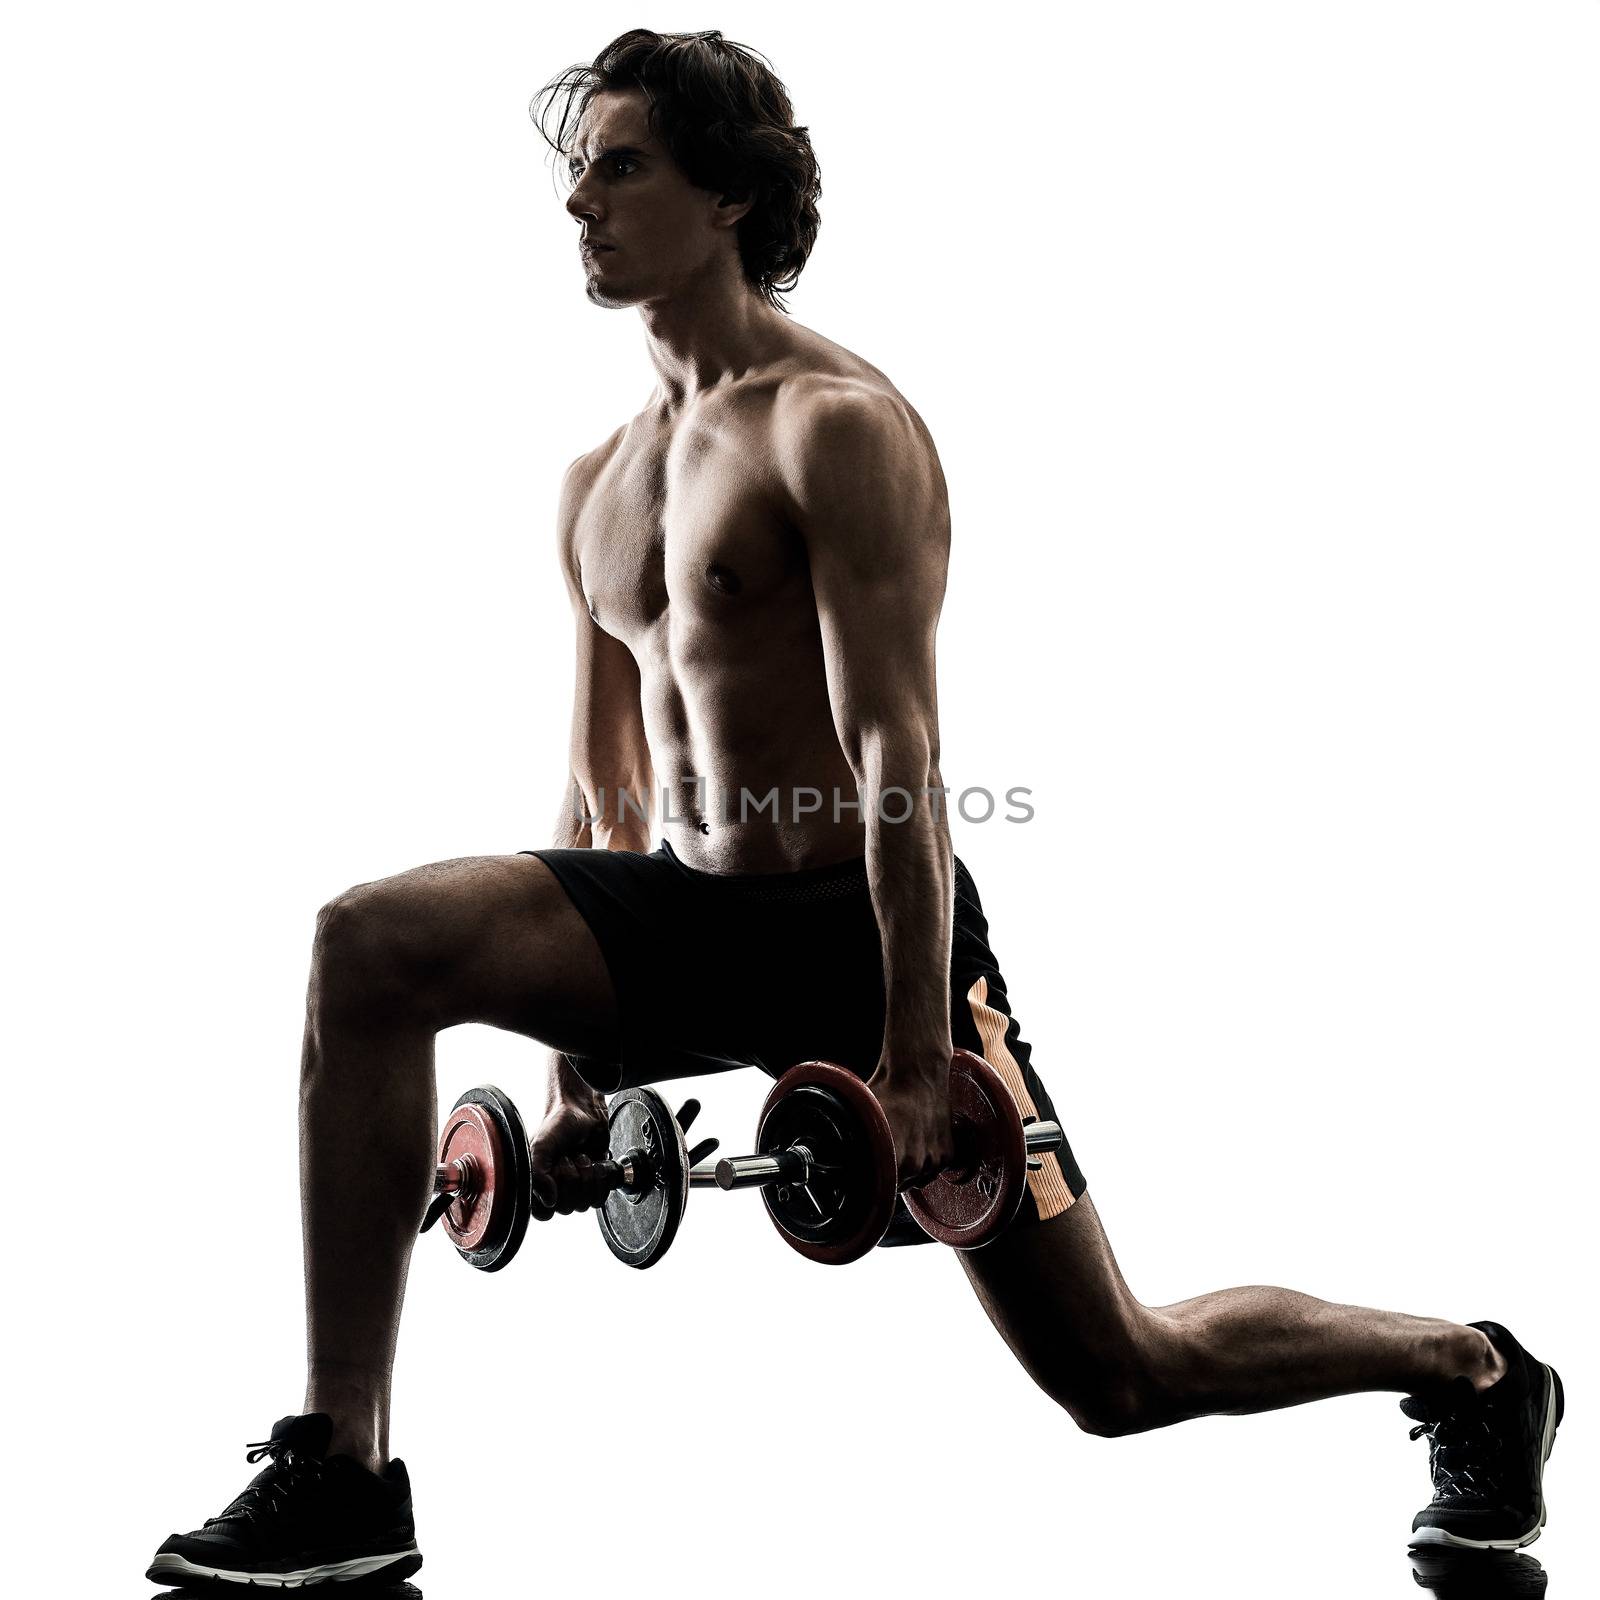 one caucasian man fitness weitghs training exercises  studio in silhouette isolated on white background